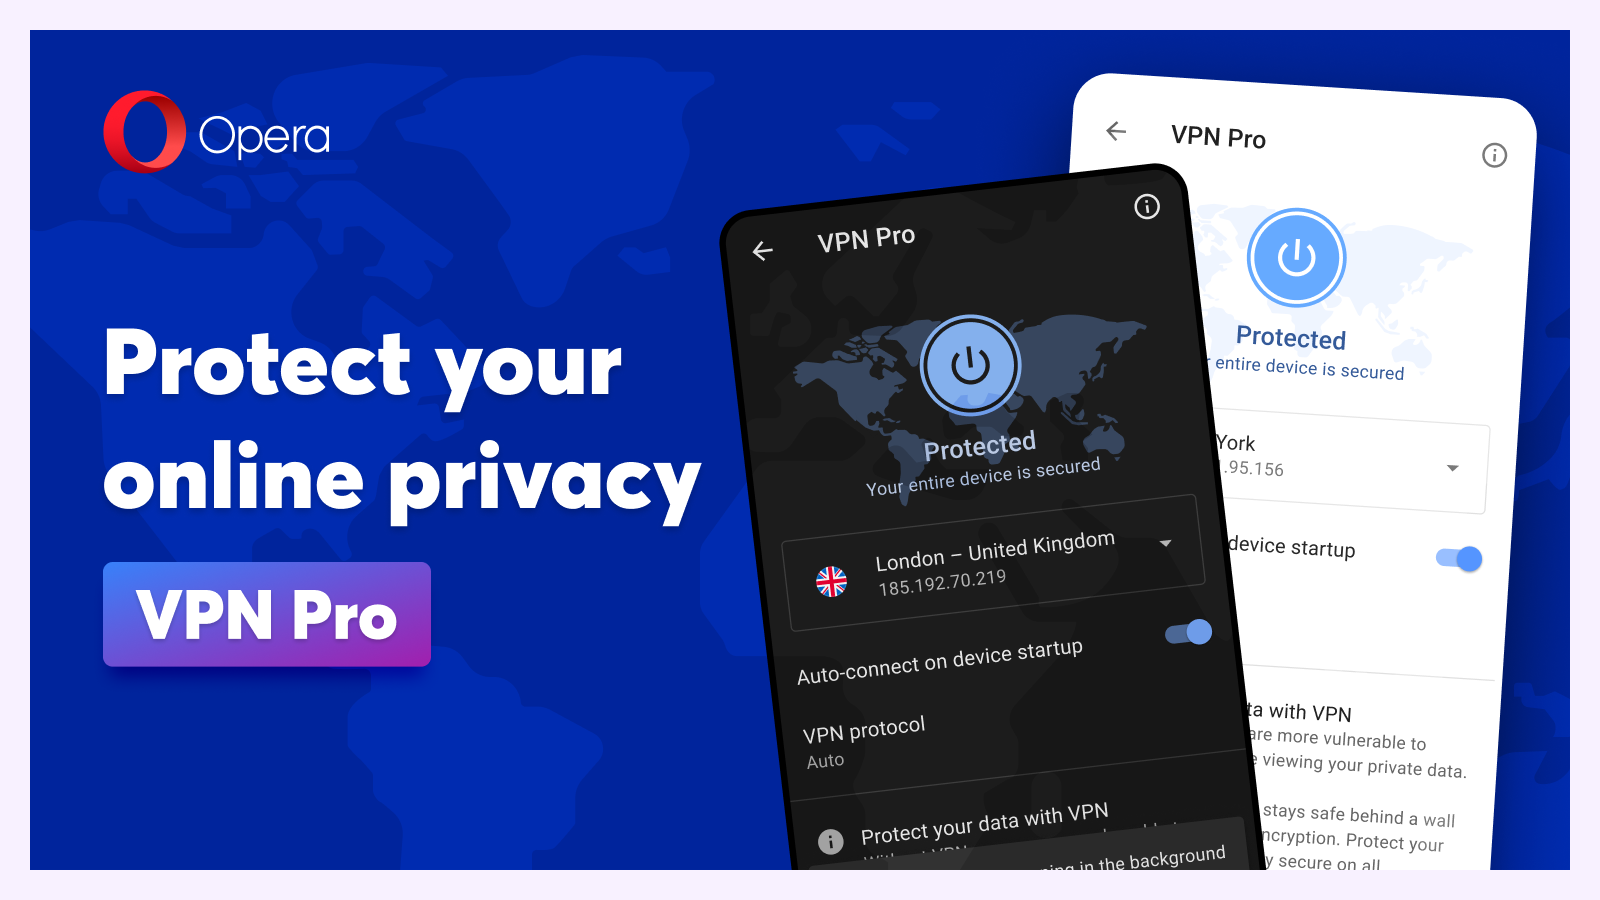 Opera’s in-built VPN just got a major upgrade – but you’ll have to pay for it